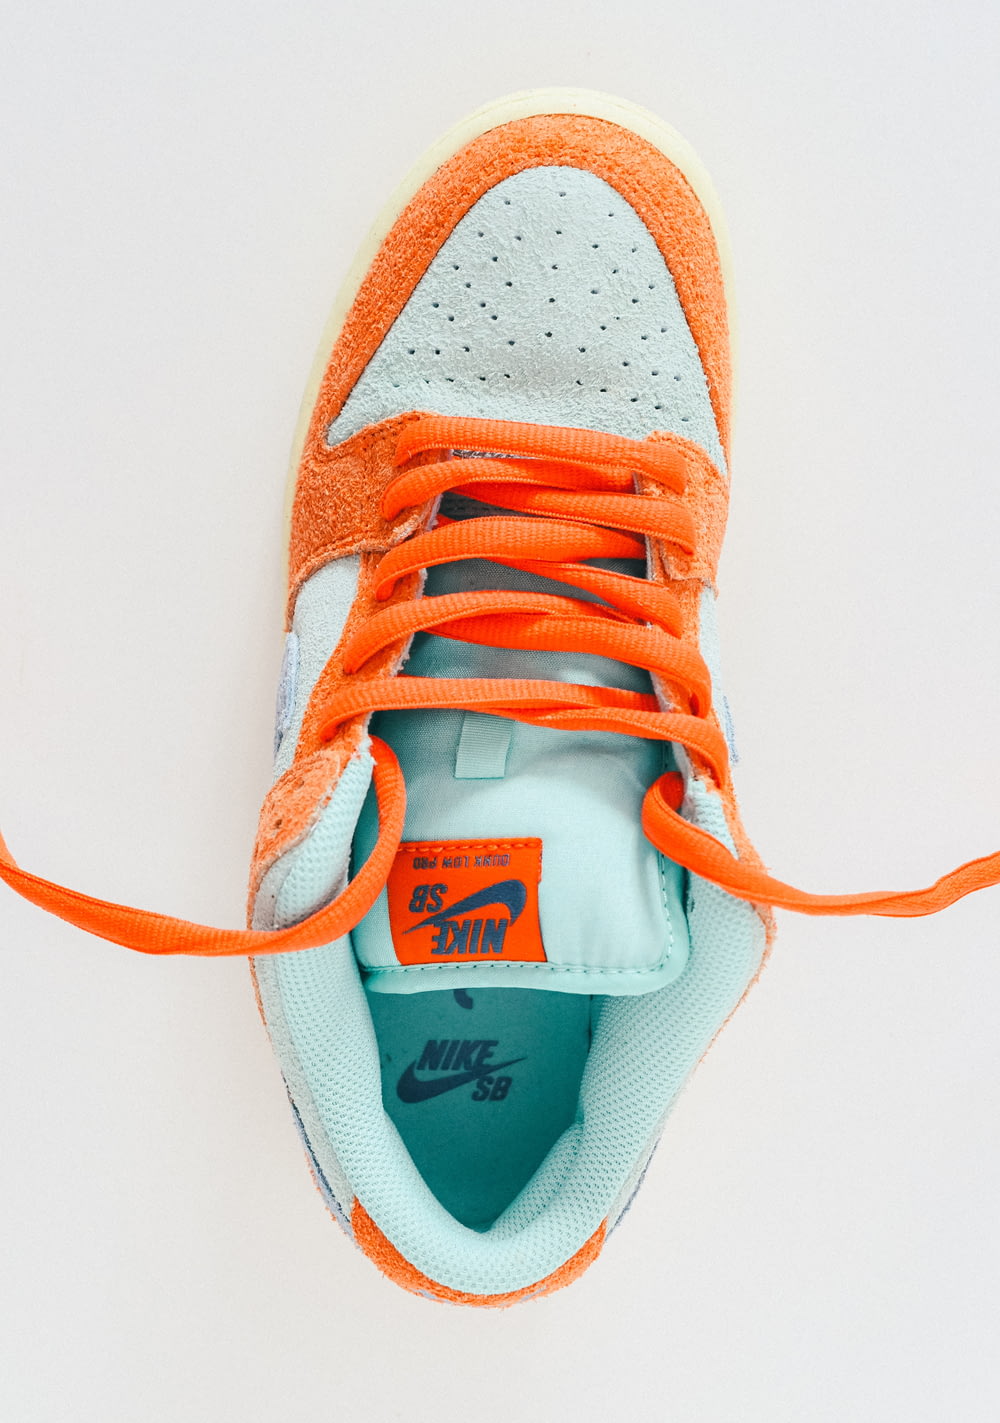 a pair of orange and blue sneakers on a white surface